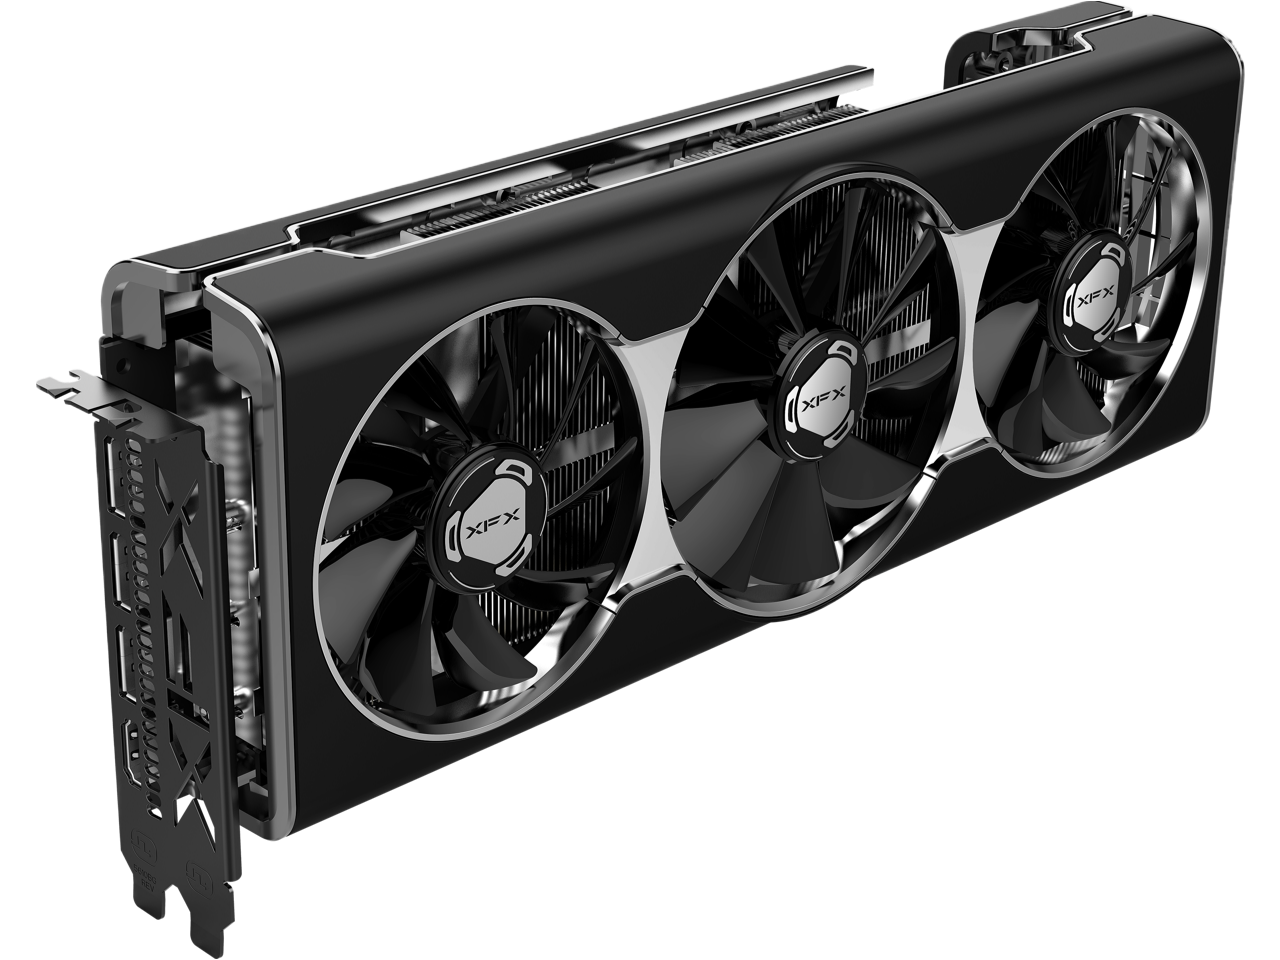 XFX RX 5700 XT Thicc III 8GB GDDR6 3xDP HDMI PCI-Express 4.0 VR Ready Ultra HD and Multi-Monitor Support Graphics Card RX-57XT8TFD8